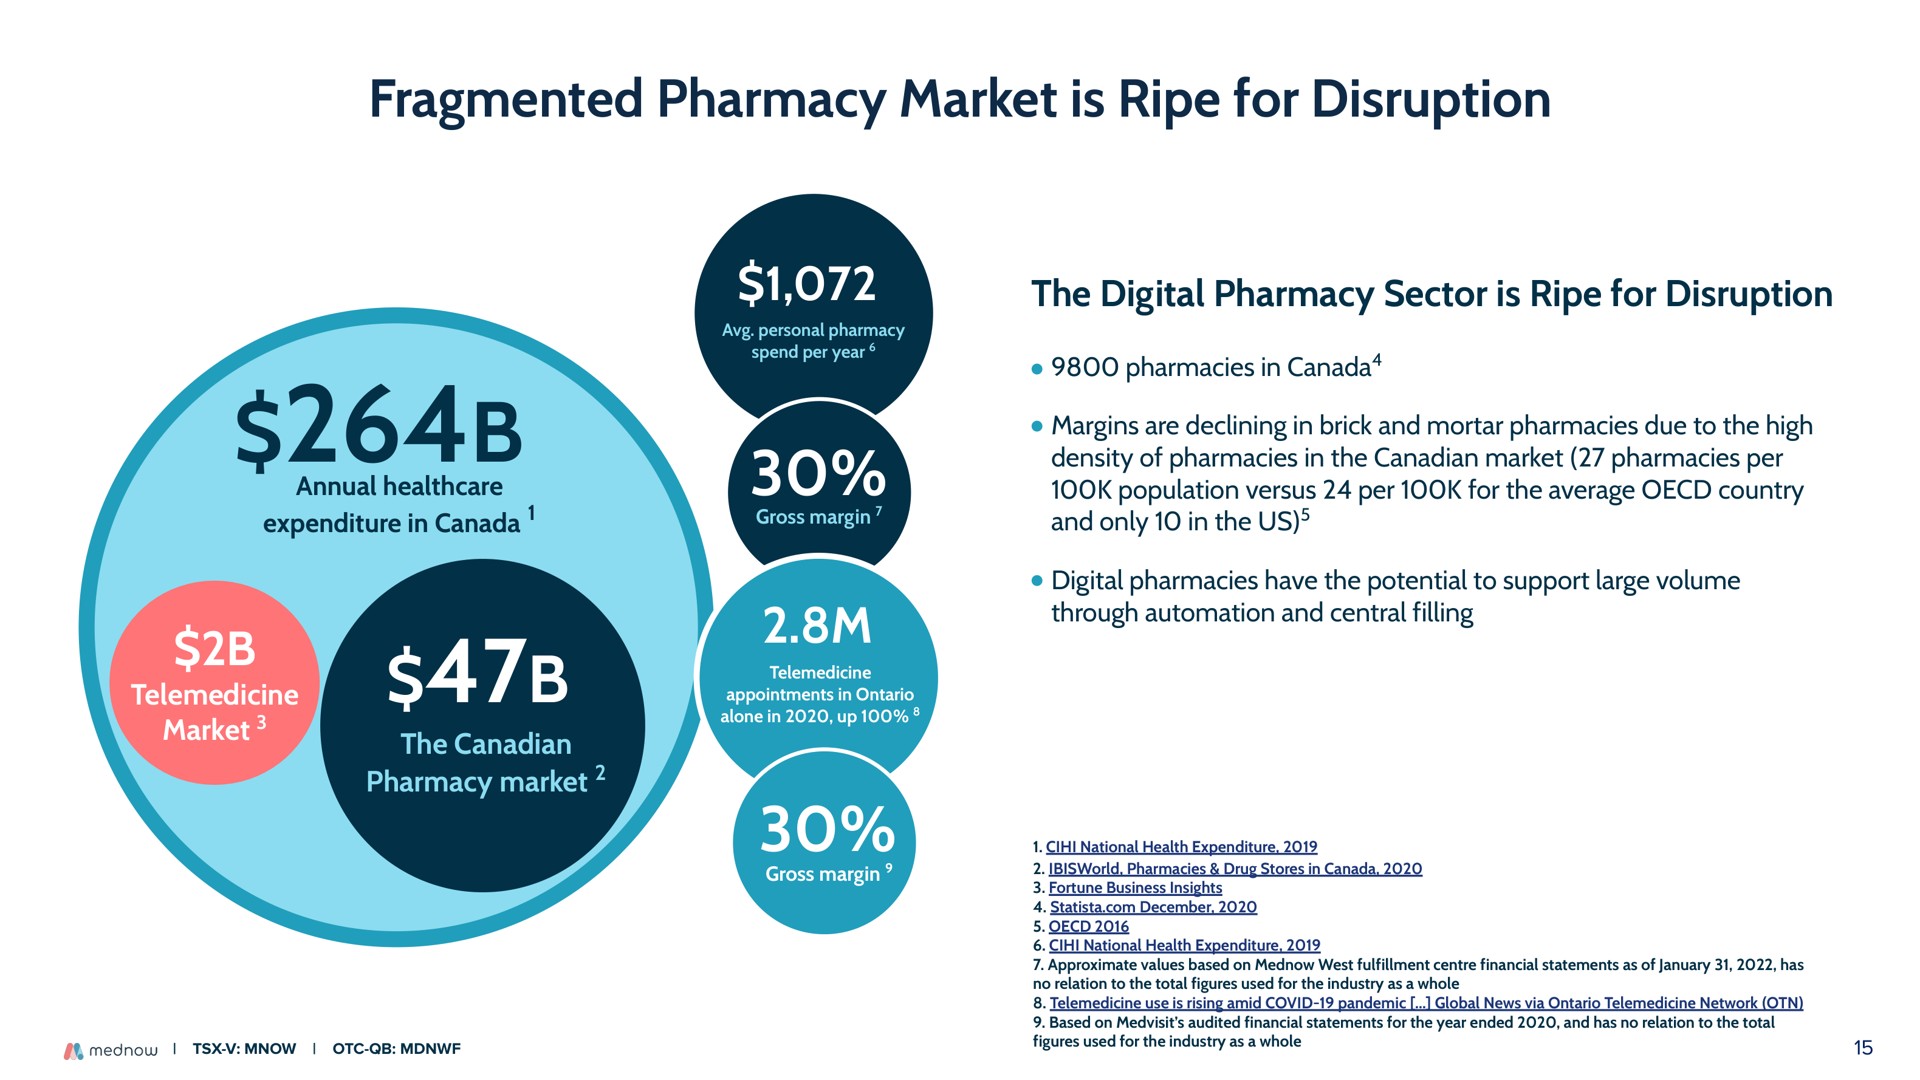 fragmented pharmacy market is ripe for disruption personal pharmacy spend per year gross margin appointments in alone in up gross margin annual expenditure in canada market the pharmacy market the digital pharmacy sector is ripe for disruption pharmacies in canada margins are declining in brick and mortar pharmacies due to the high density of pharmacies in the market pharmacies per population versus per for the average country and only in the us digital pharmacies have the potential to support large volume through and central filling | Mednow